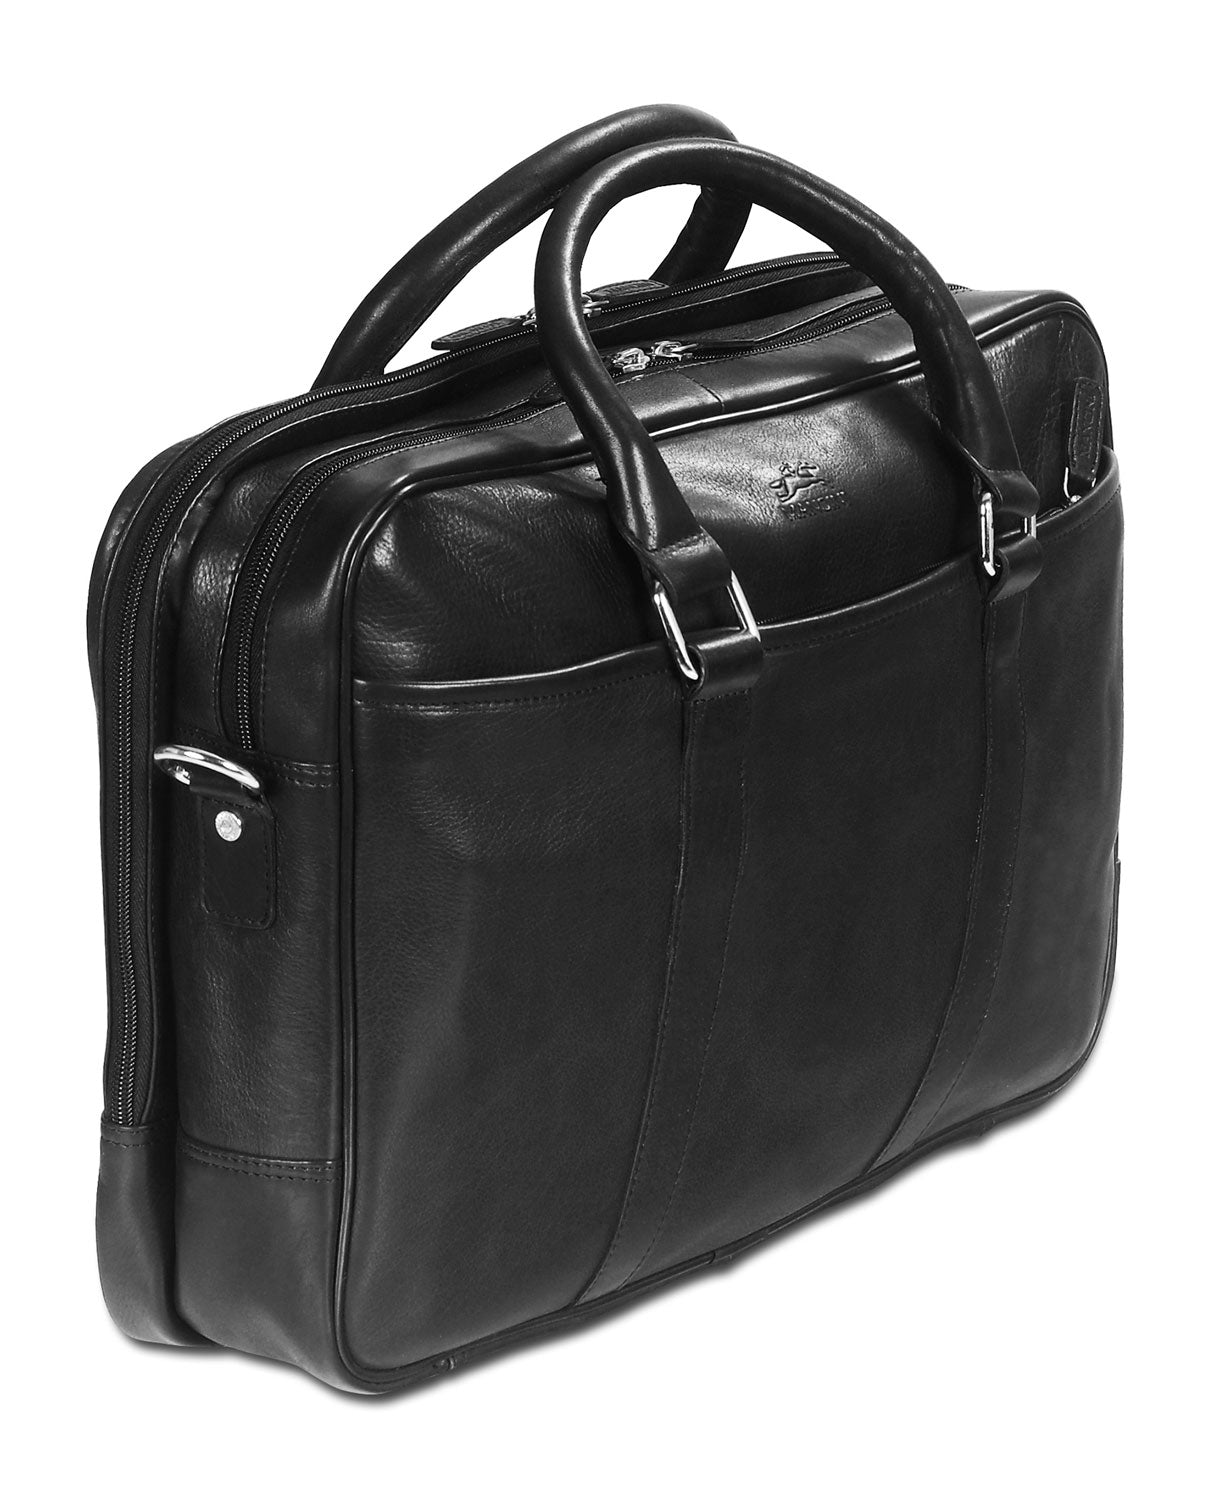 Mancini Leather Double Compartment Zippered Briefcase for 15.6" Laptop / Tablet, 15.5" x 4.25" x 11.25", Black